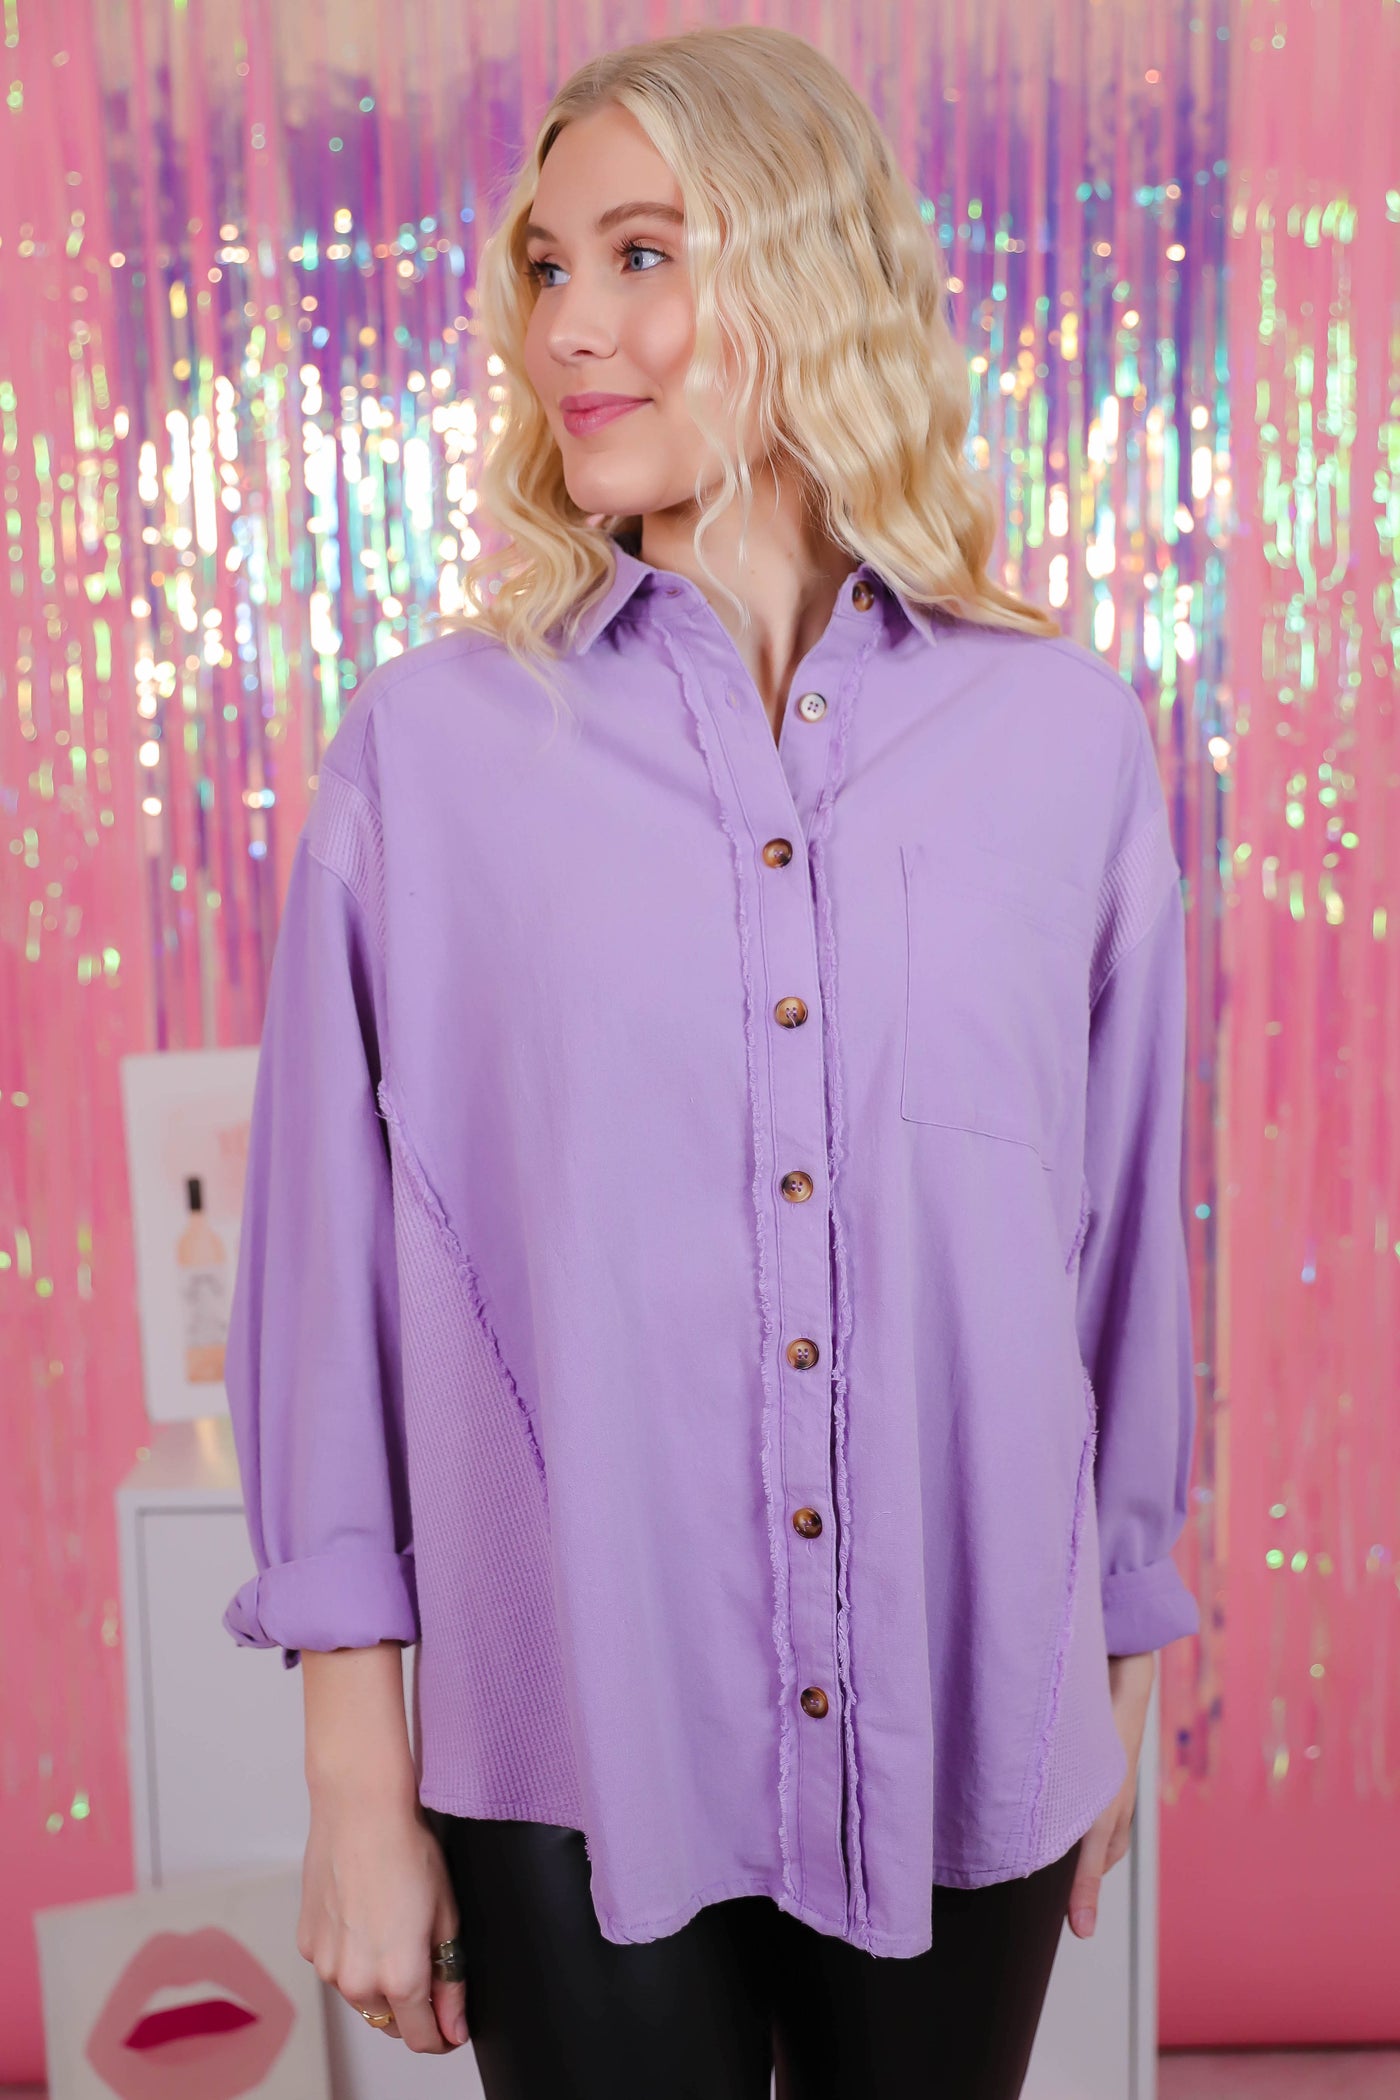 Women's Oversized Button Down- Purple Trendy Button Down- Free People Dupe Shirt